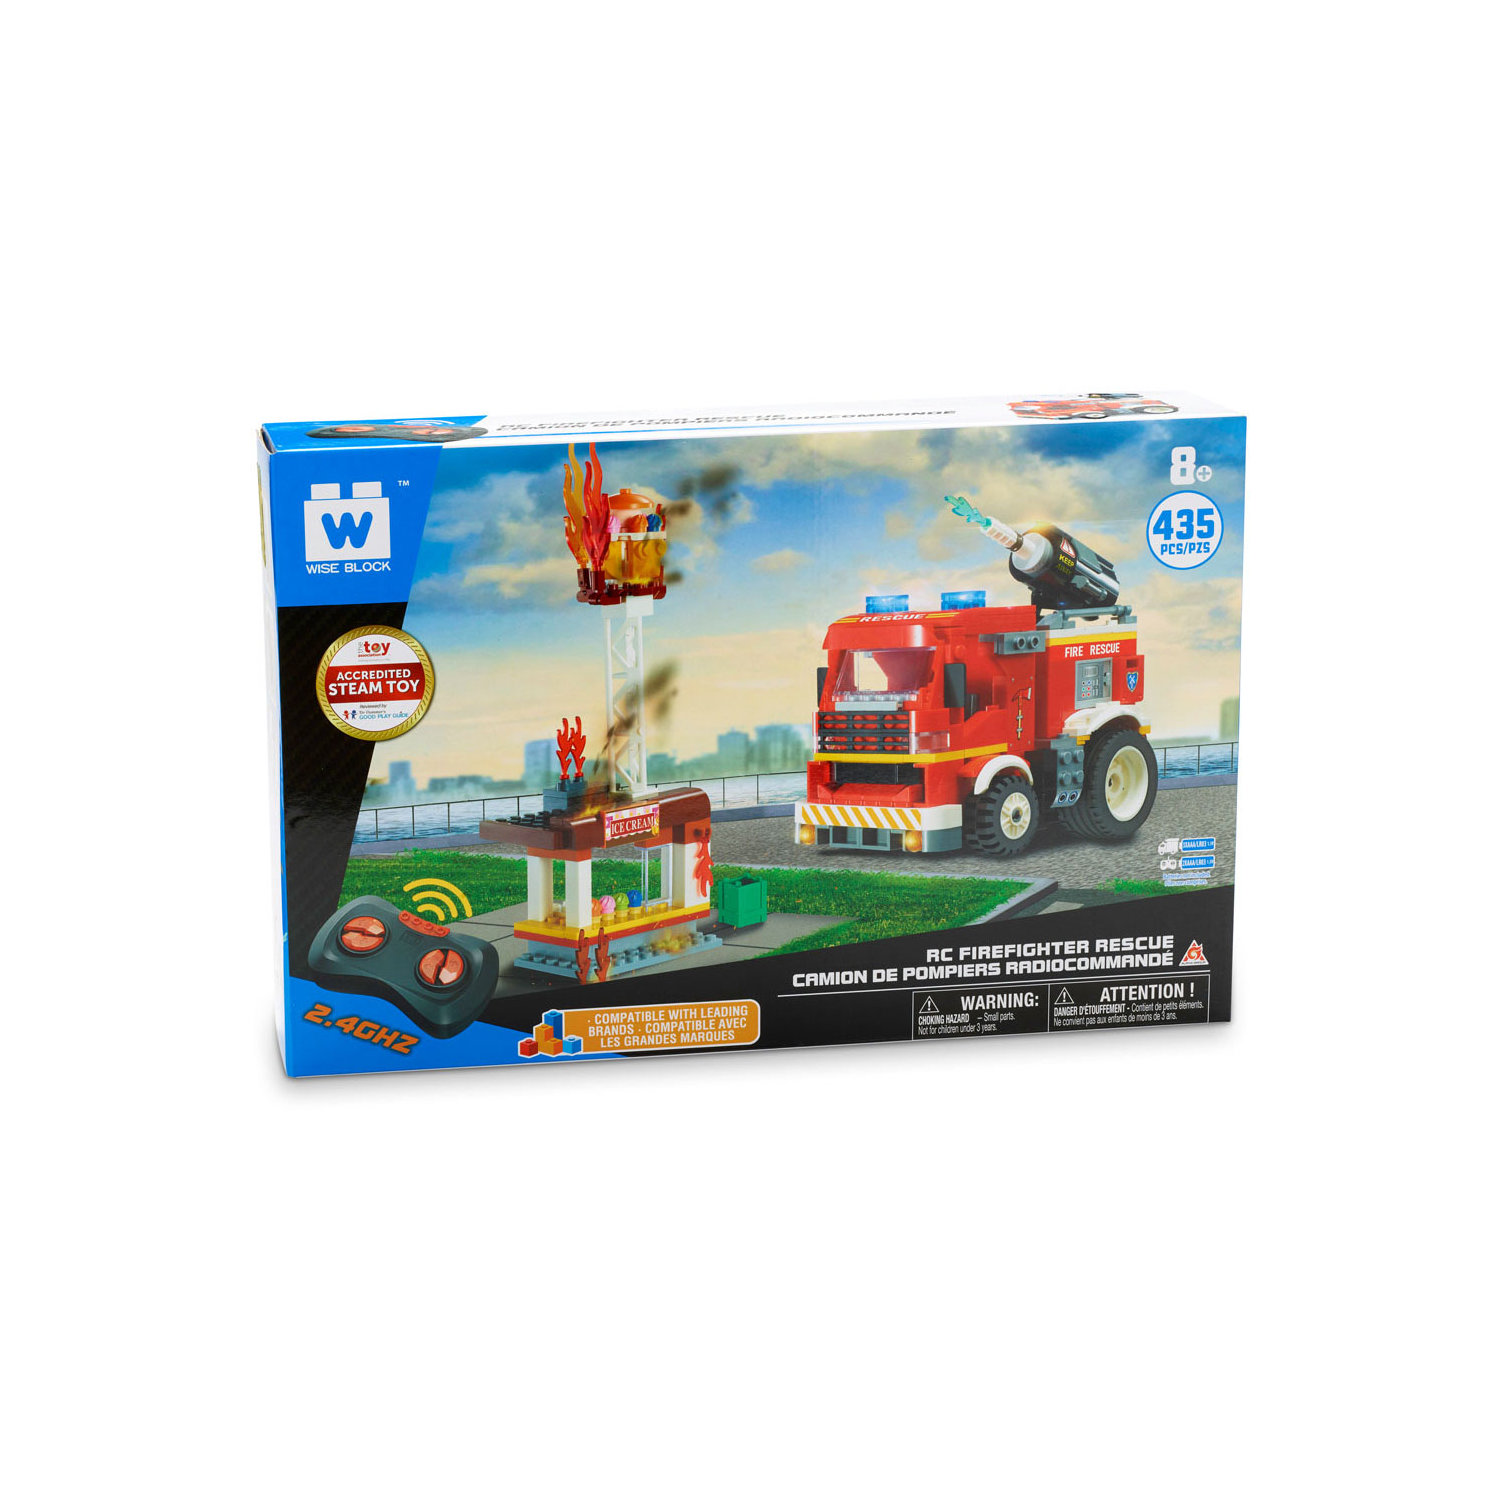 Wise Block - RC Firefighter Rescue - Save-On-Foods